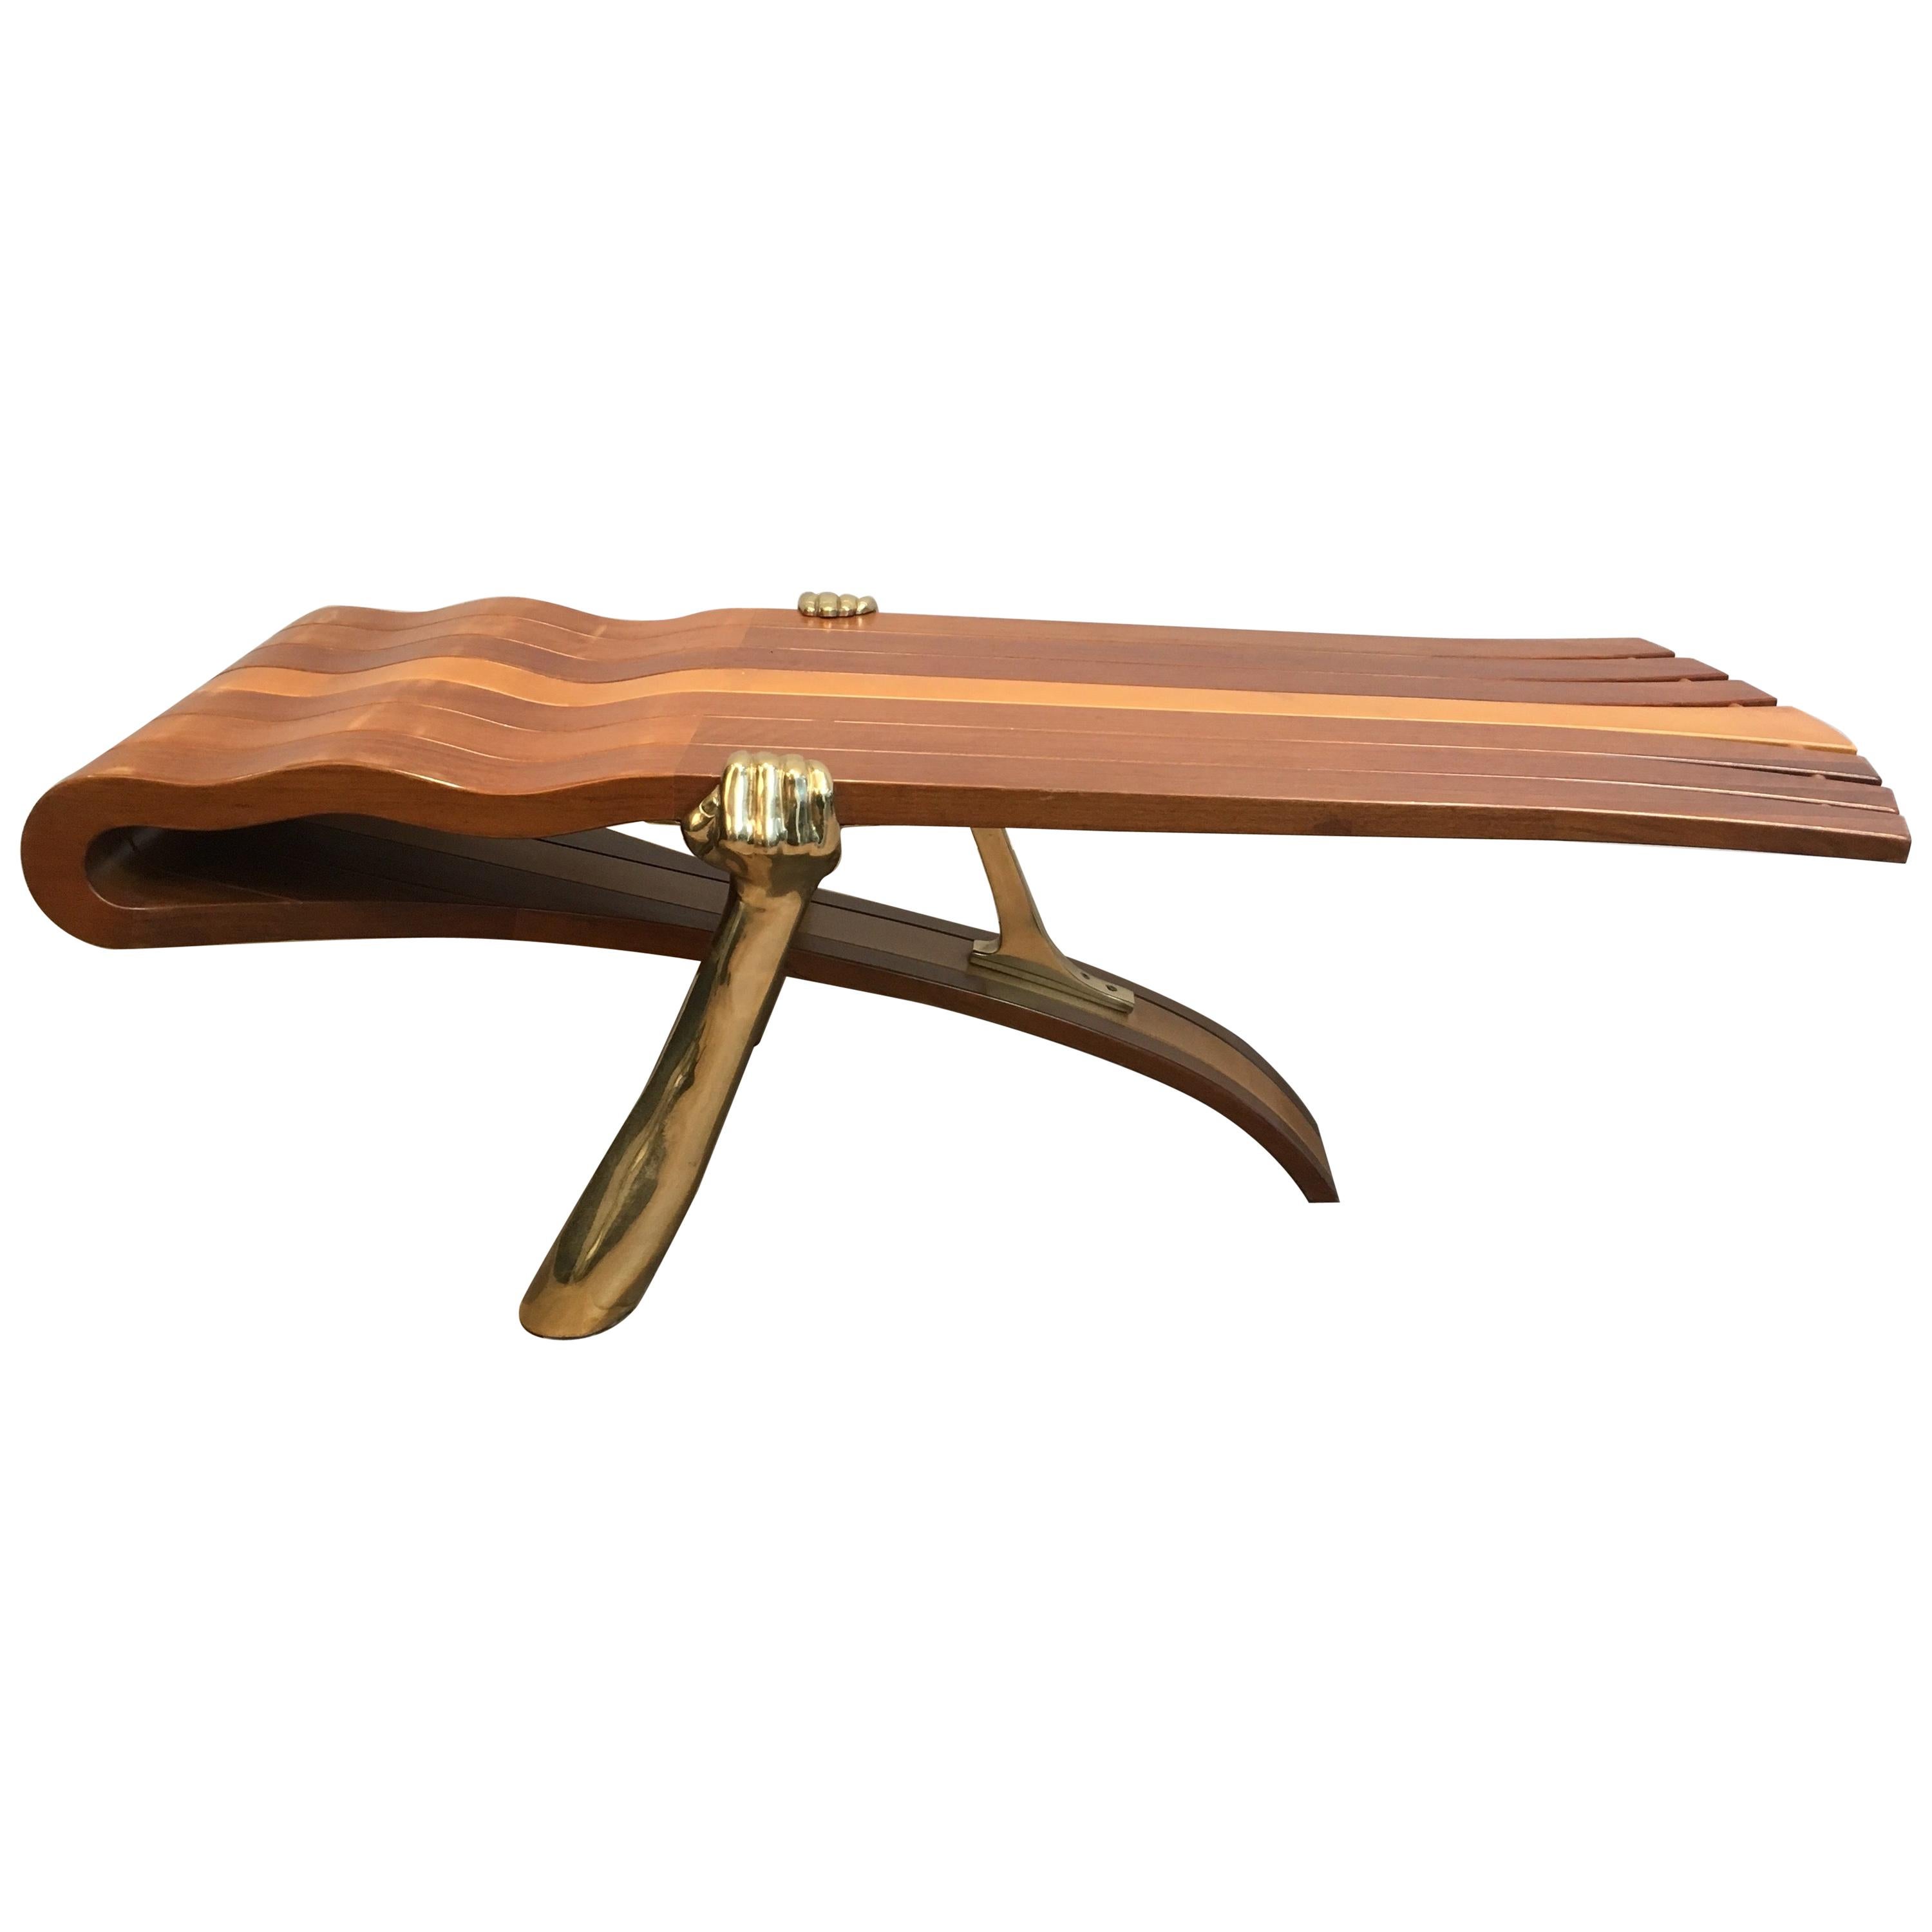 Unique Coffee Table Made of a Thick Freeform Wood Top Supported by Brass Arms